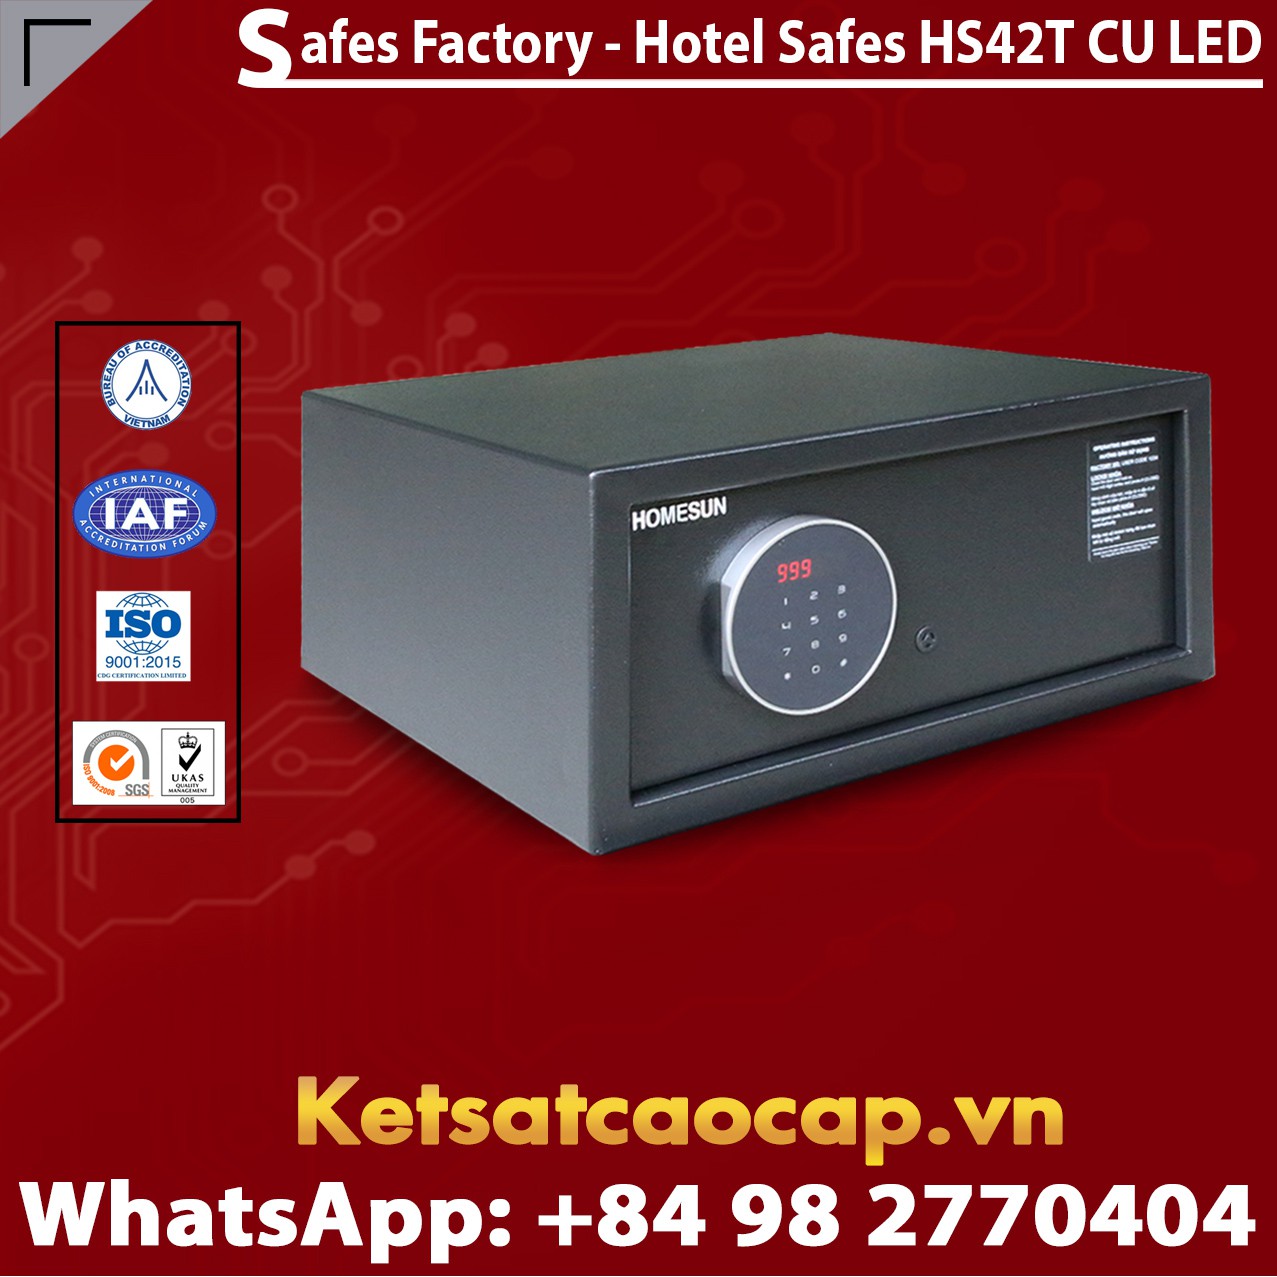 Best Sellers In Hotel Safes HOMESUN HS42T CU LED